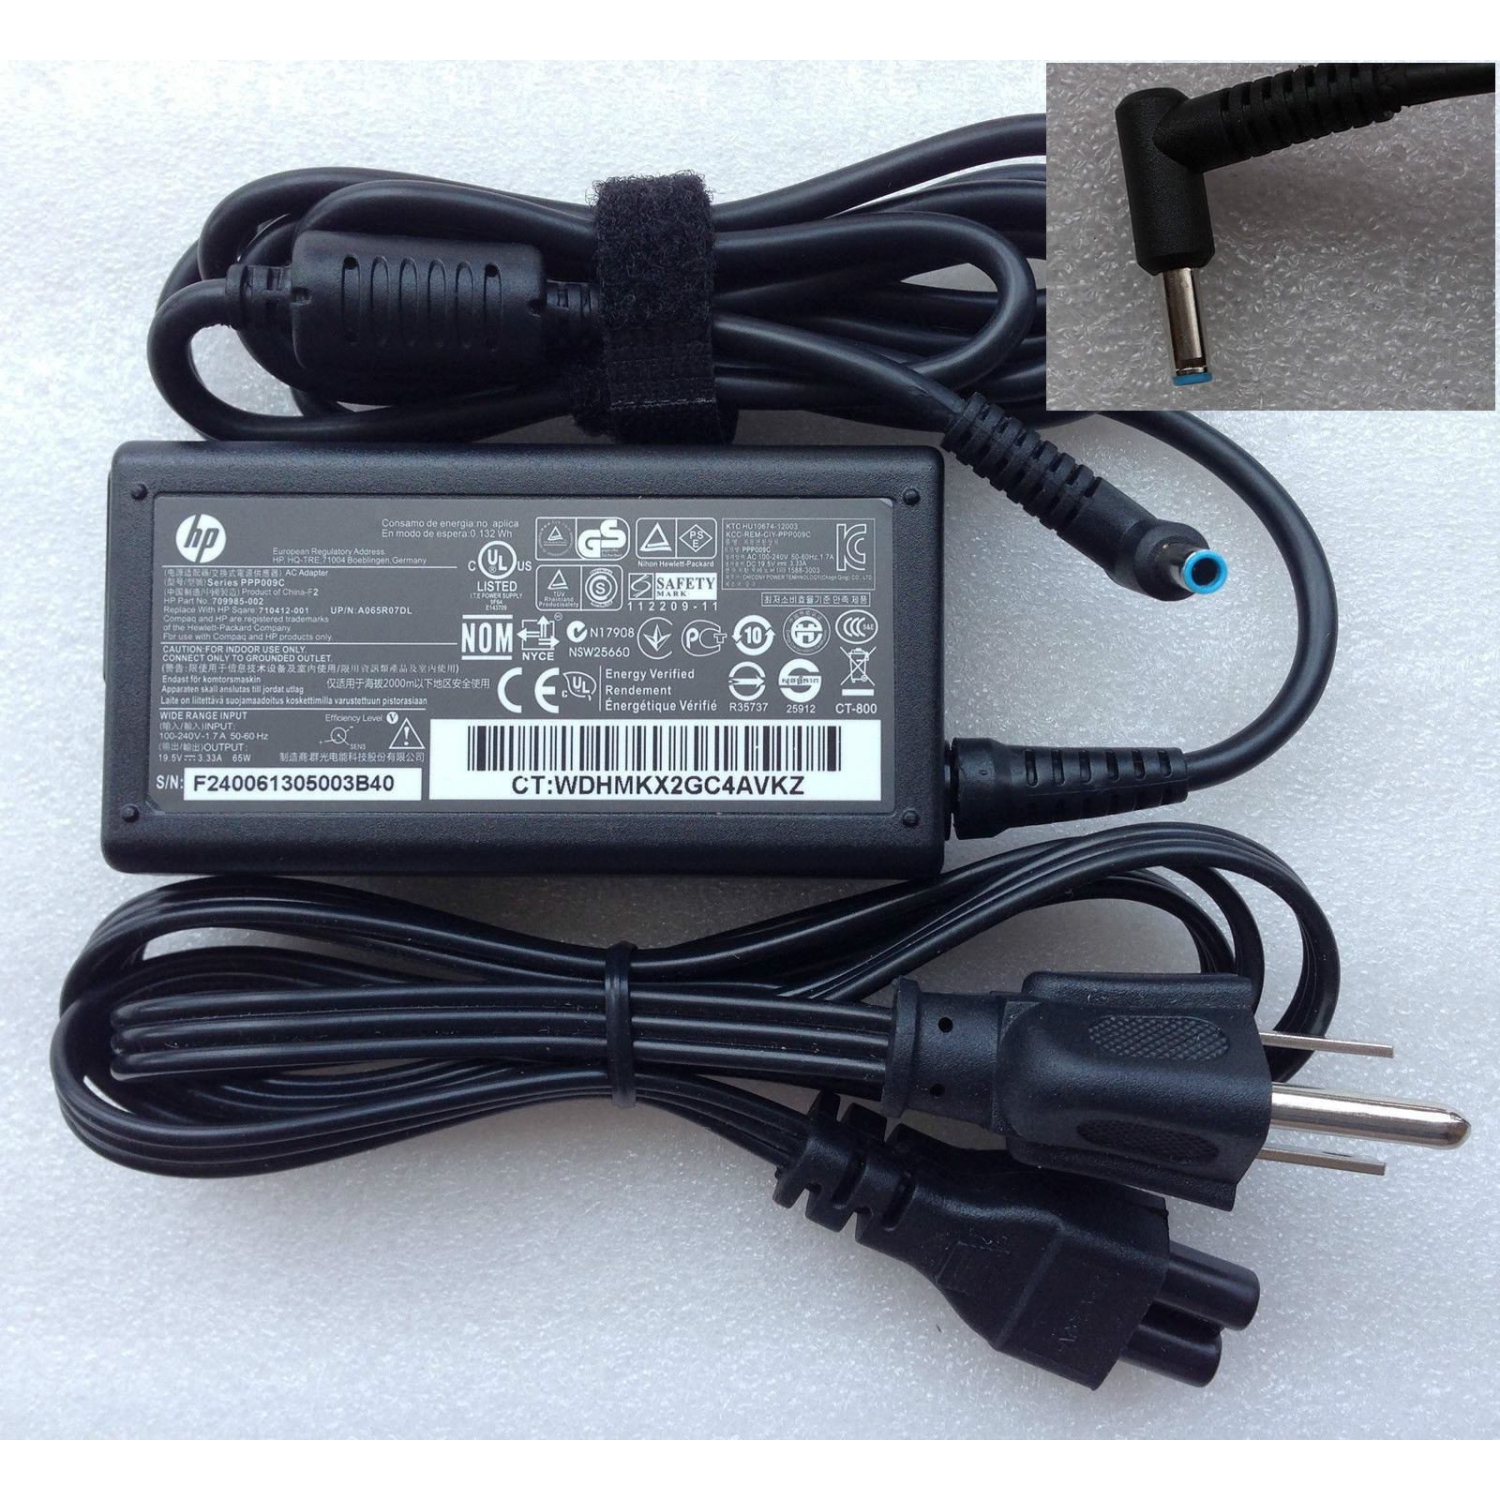 New Genuine HP ProBook 430 440 445 450 470 G3 ONLY Series AC Adapter Charger Blue Tip 65W